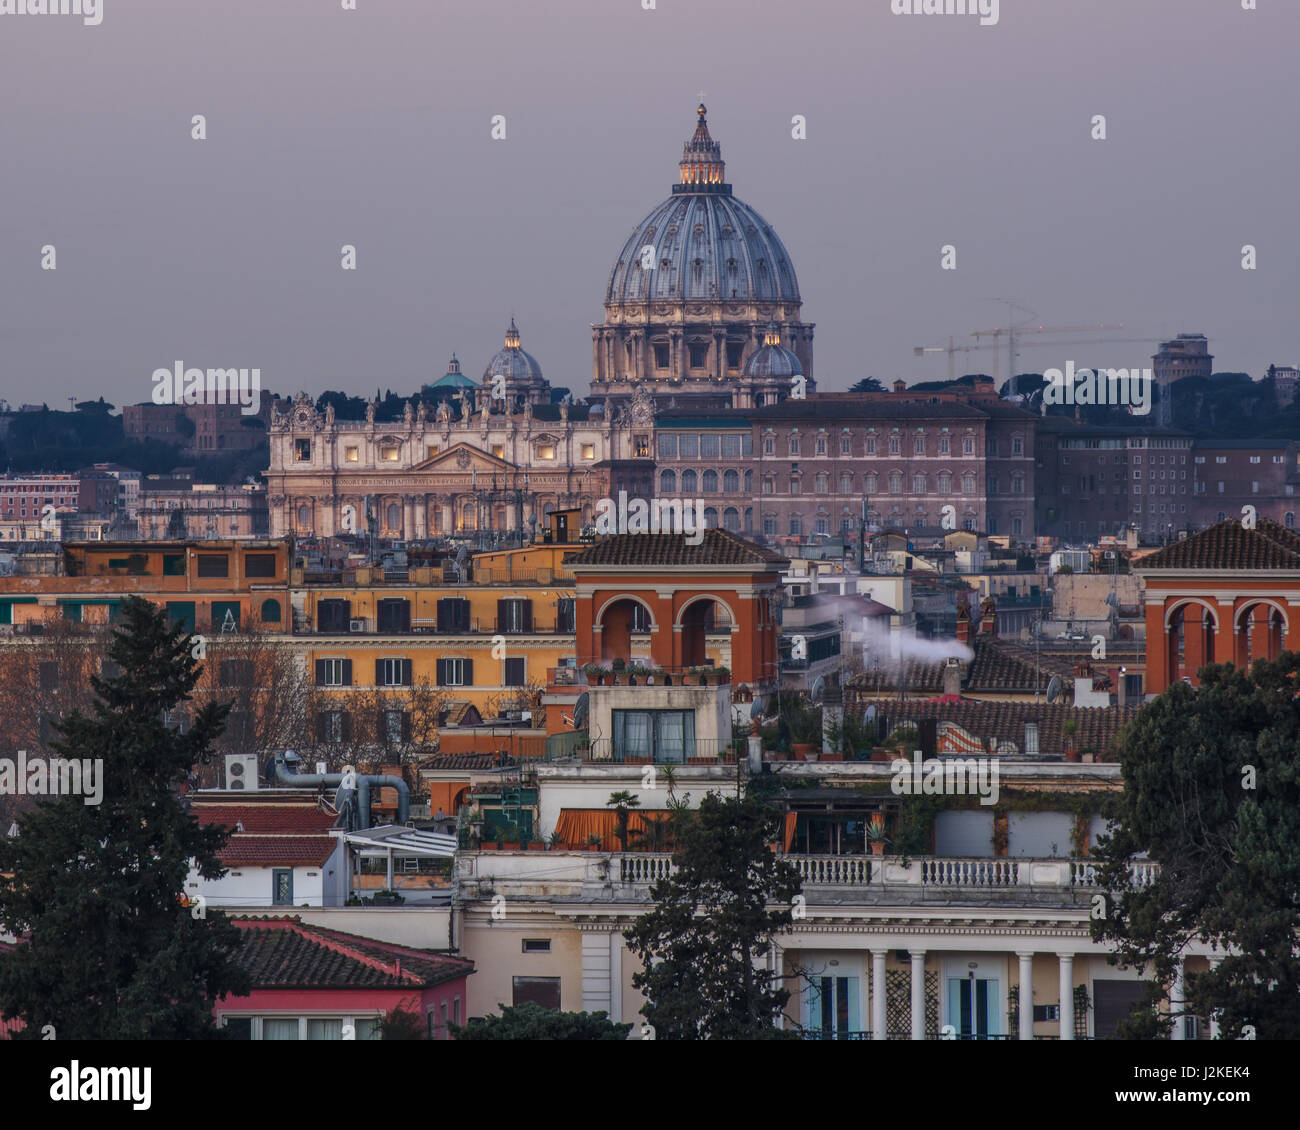 Basilica di San Pietro and Vatican viewed across the rooftops of Rome, Italy, taken from the Piazza del Popolo at dawn Stock Photo